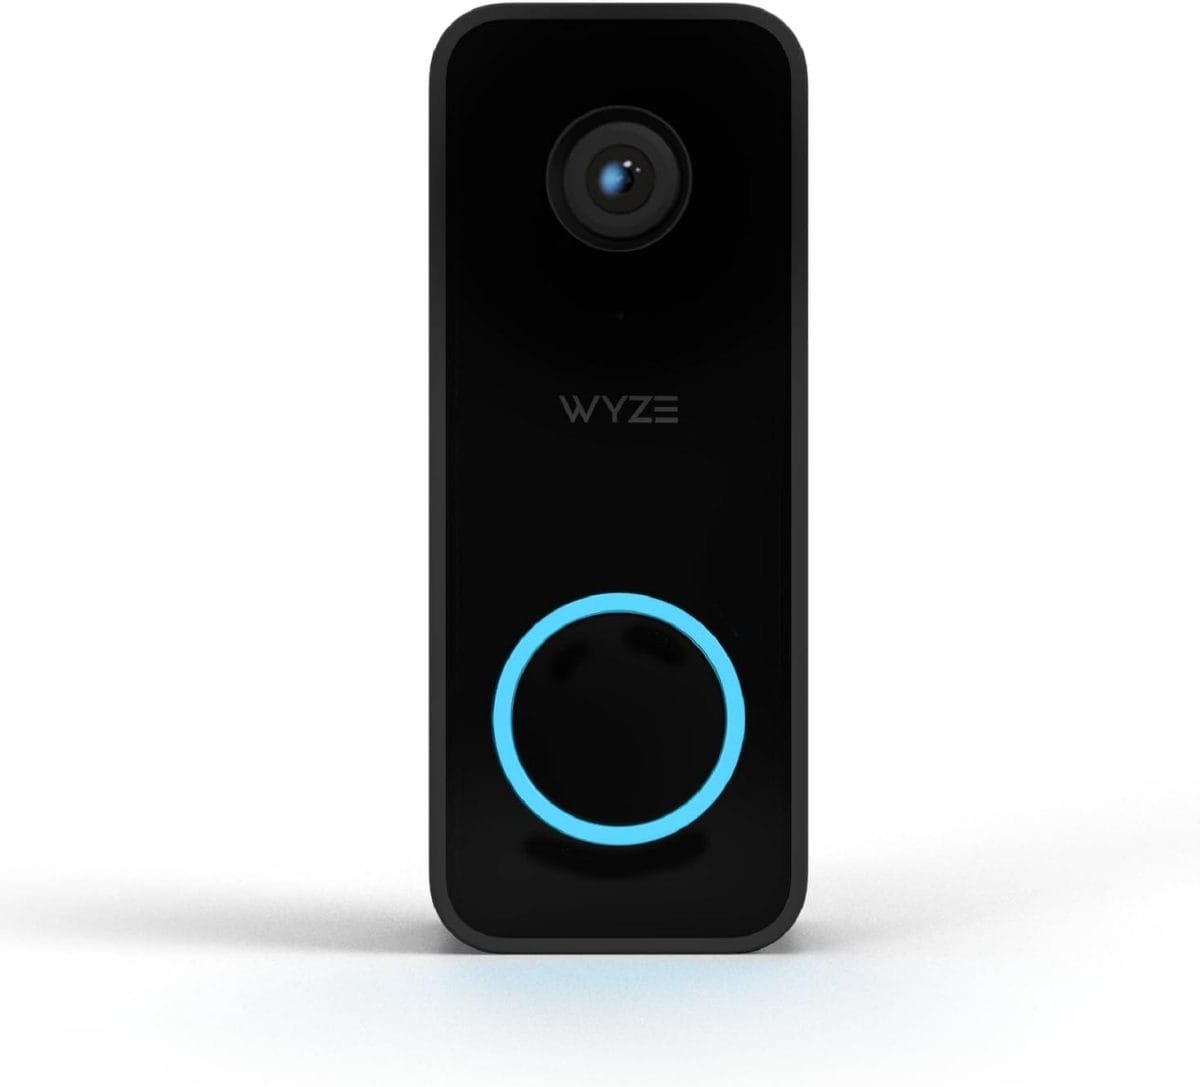 Wyze Video Doorbell v2, Wired, 2K Video, 24/7 Local Recording with microSD Card, Works with Existing Chime, IP65 Weather Resistant, Color Night Vision, and Two-Way Audio, Black